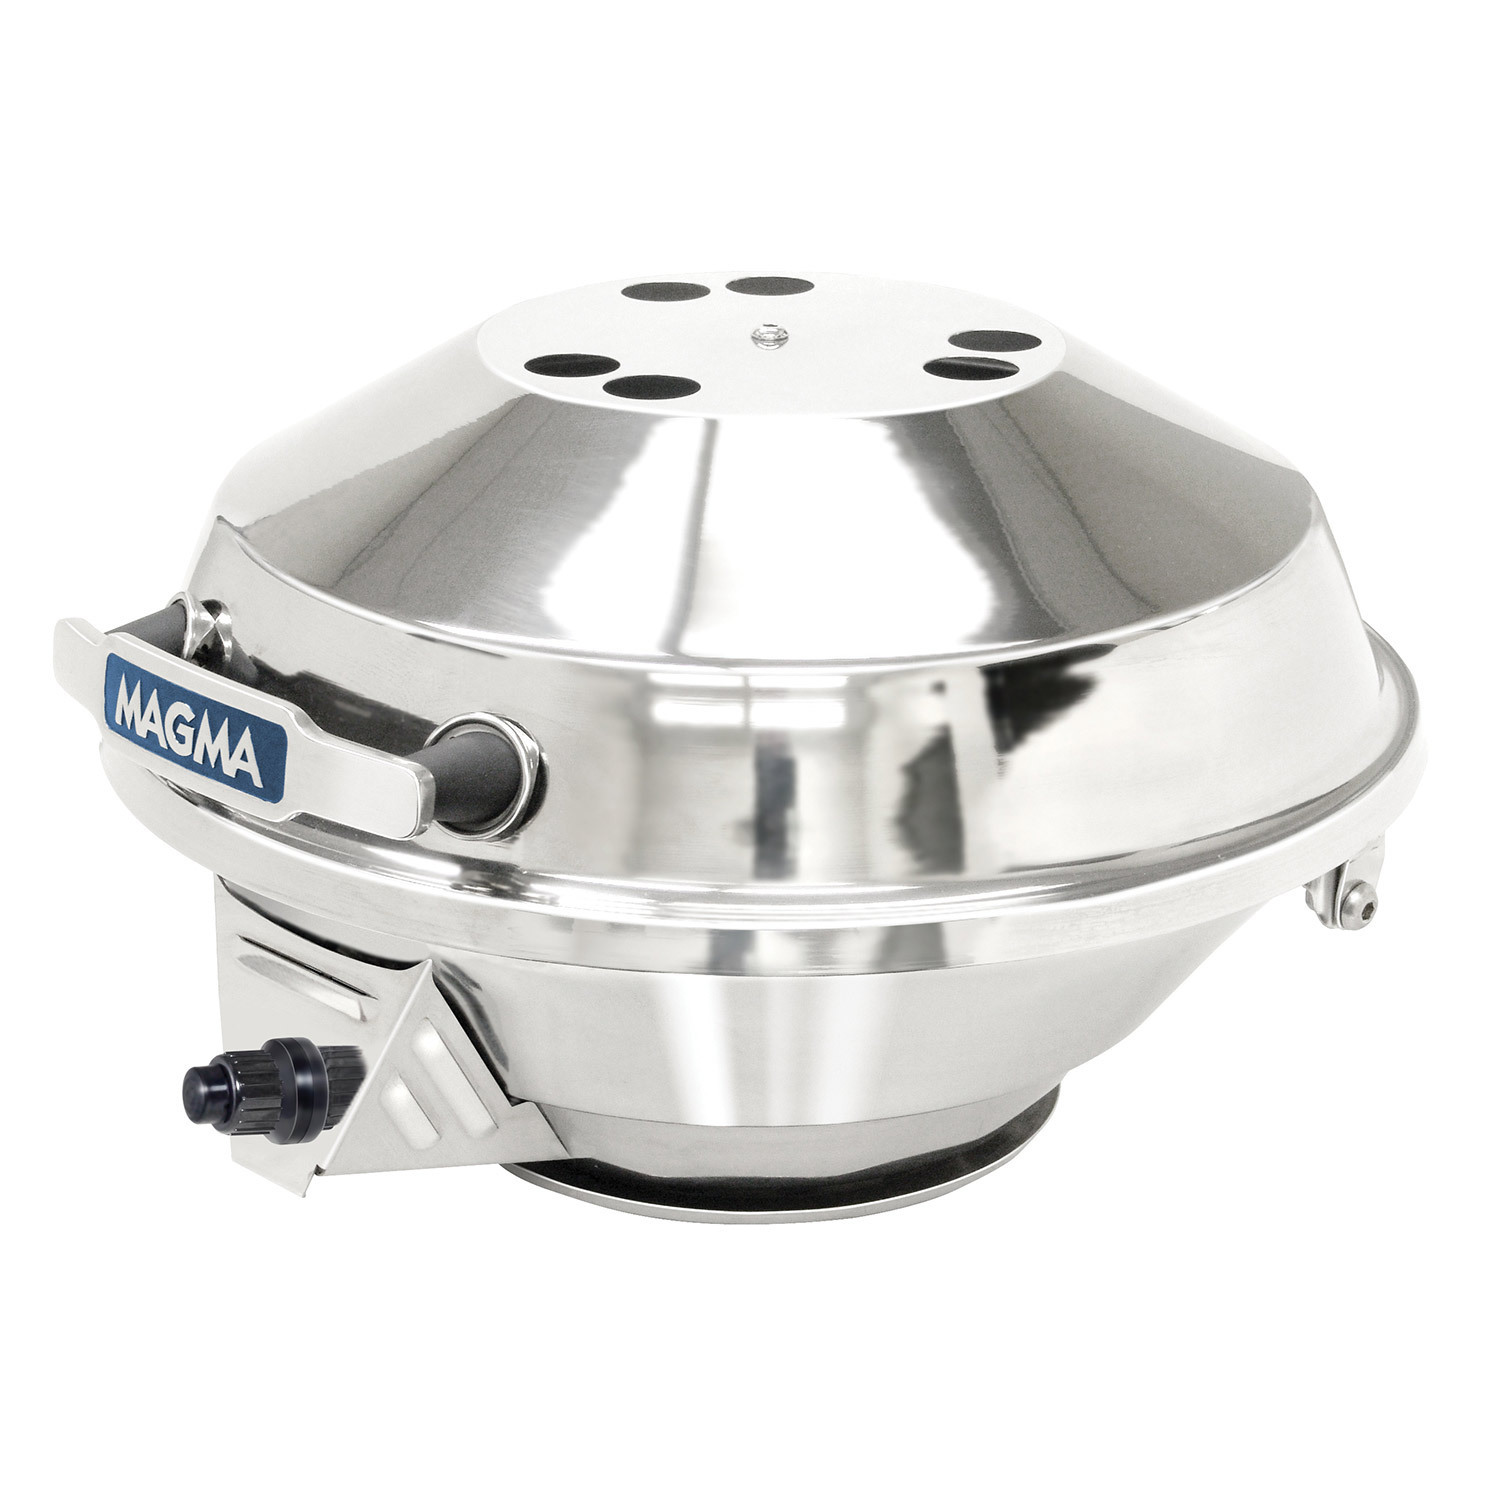 MAGMA MARINE KETTLE 3 PARTY SIZE GAS GRILL 17" 